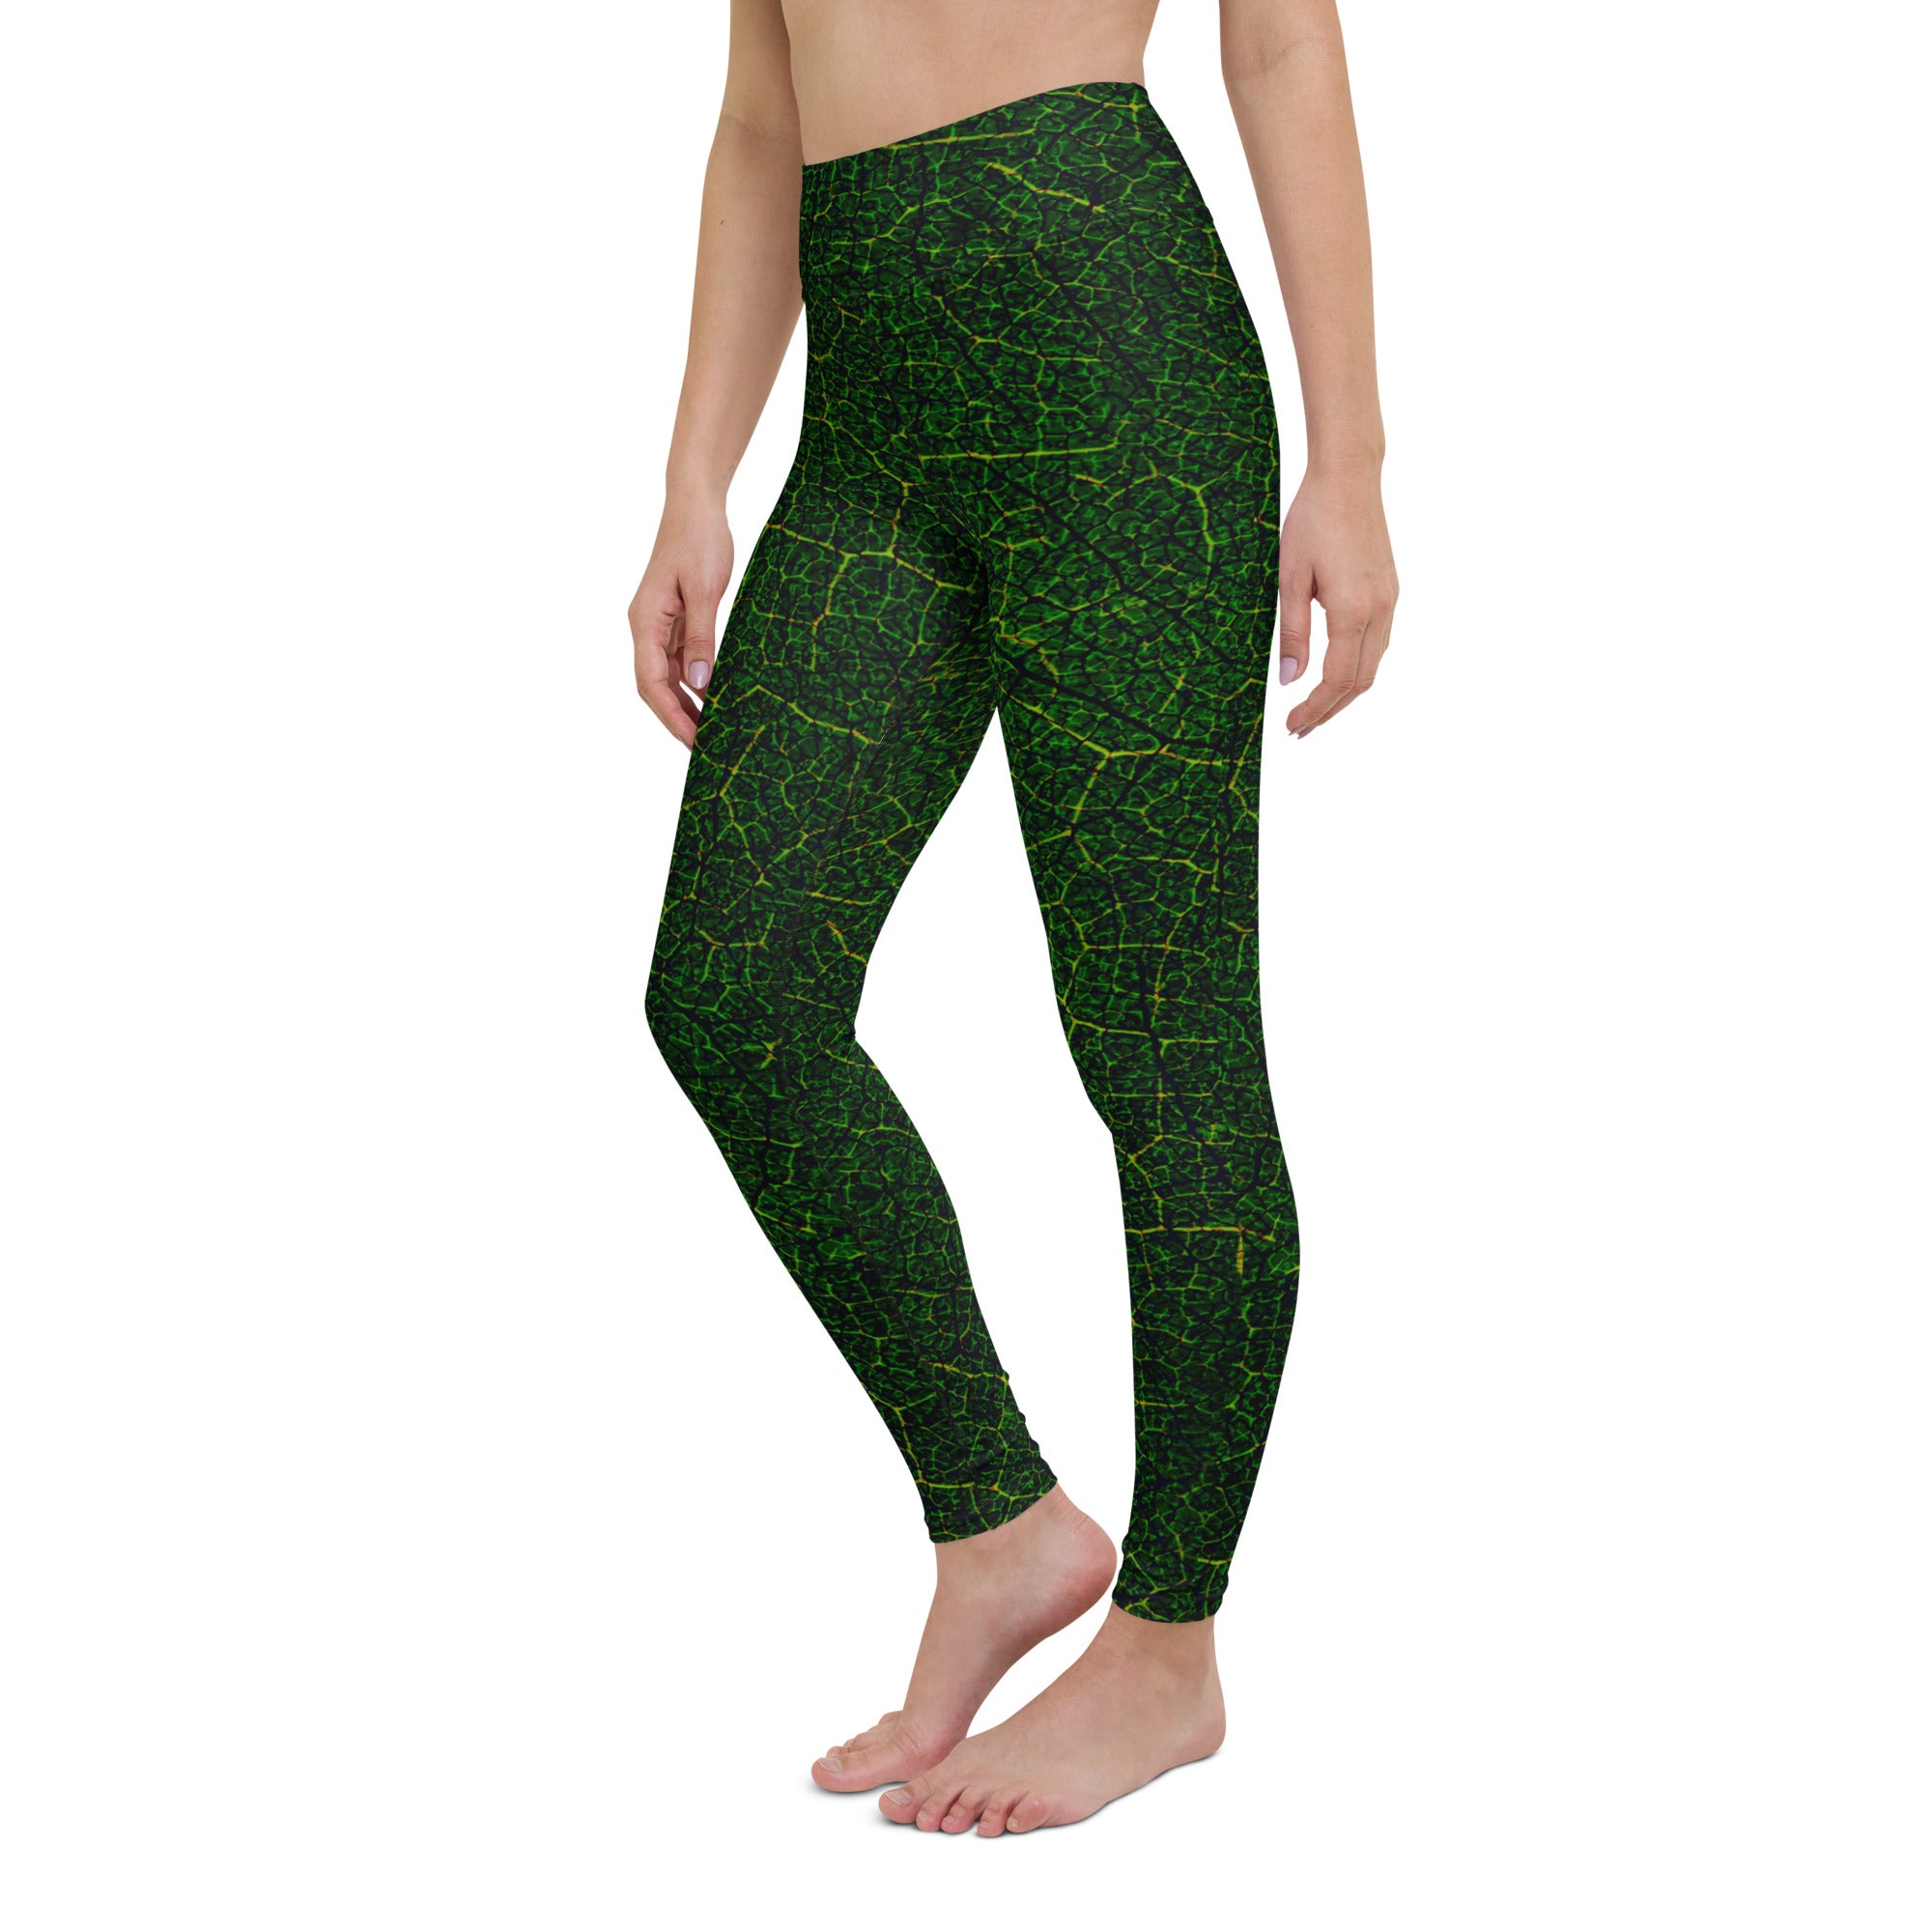 Verdant Vines Yoga Leggings displayed, emphasizing the captivating greenery design and body-hugging fit perfect for yoga enthusiasts.